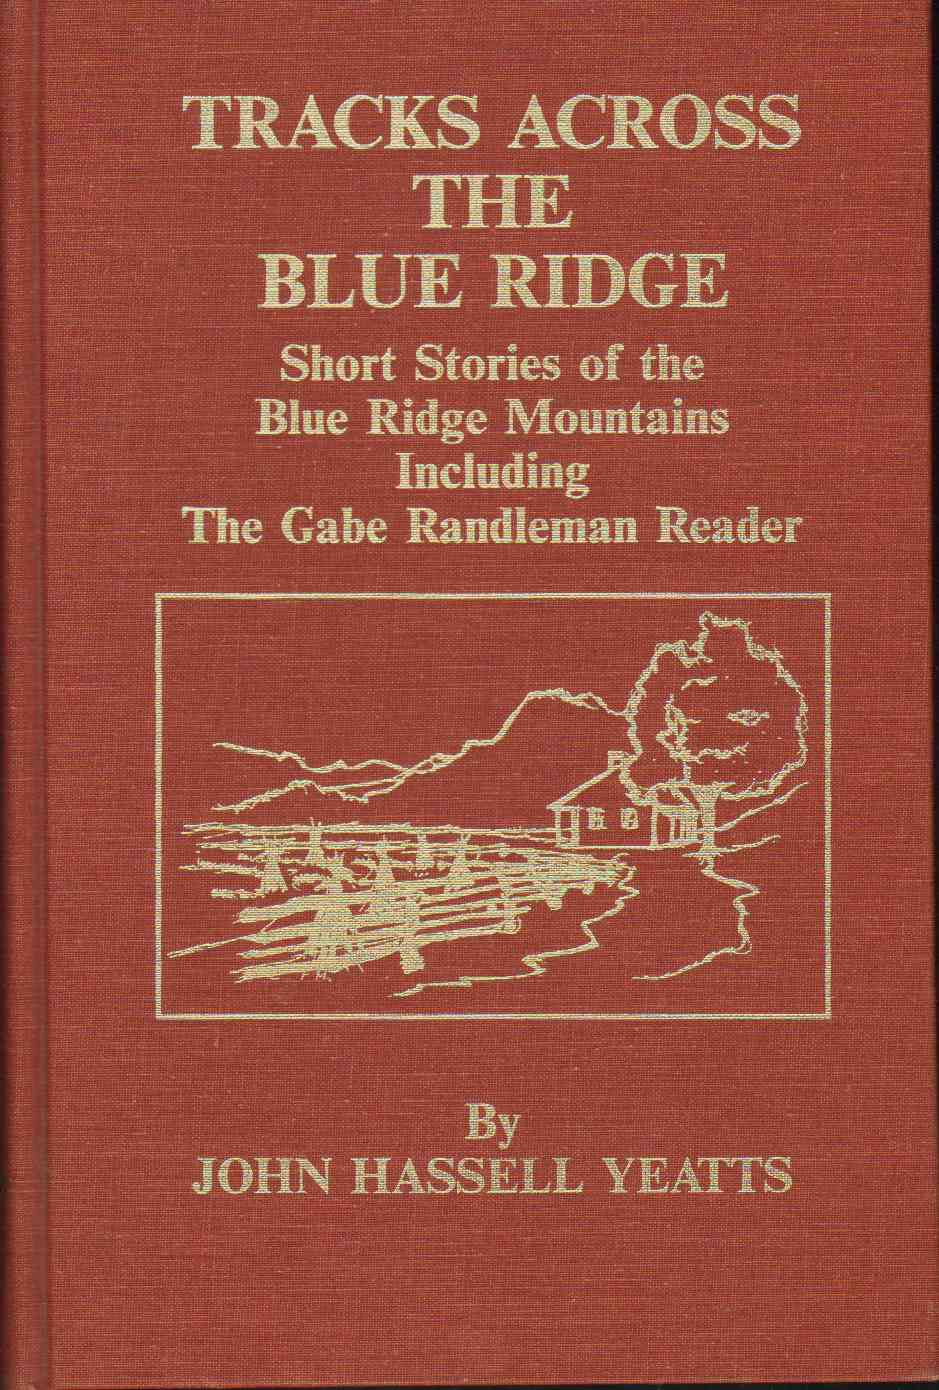 Image for TRACKS ACROSS THE BLUE RIDGE Short Stories of the Blue Ridge Mountains Including the Gabe Randleman Reader